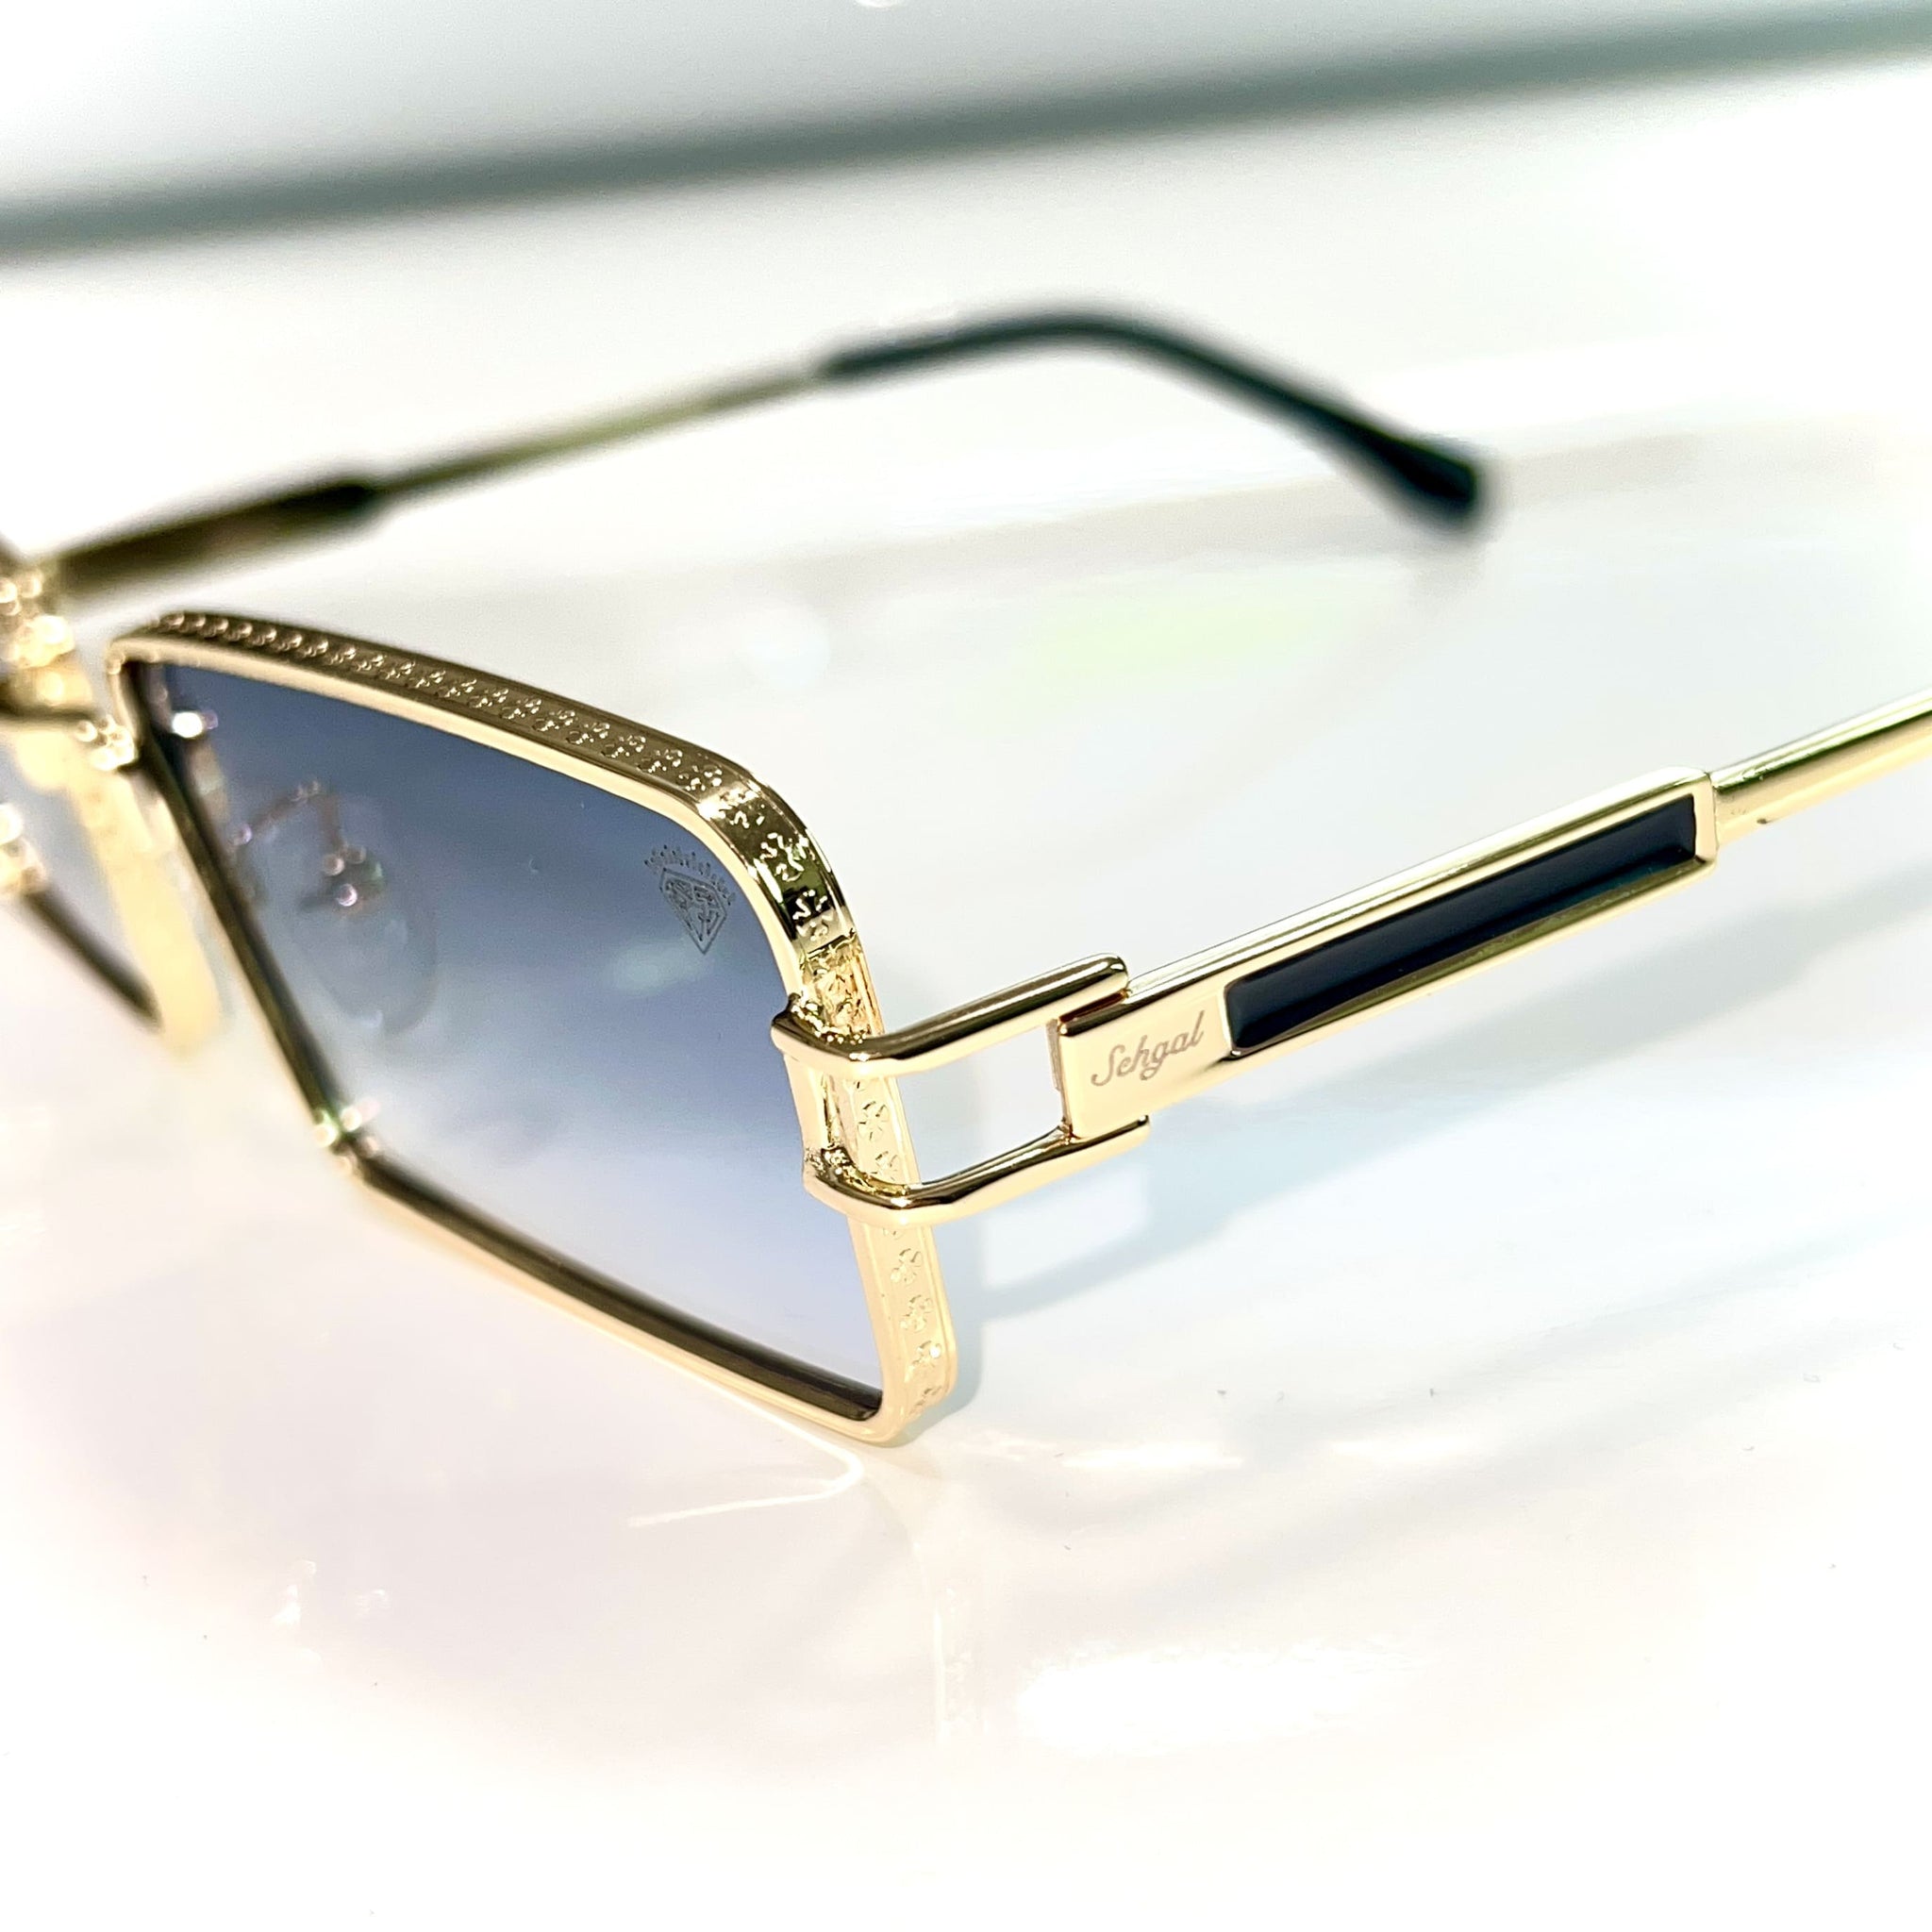 Opulent Glasses - 14 carat gold plated - Blue Shade - Sehgal Glasses